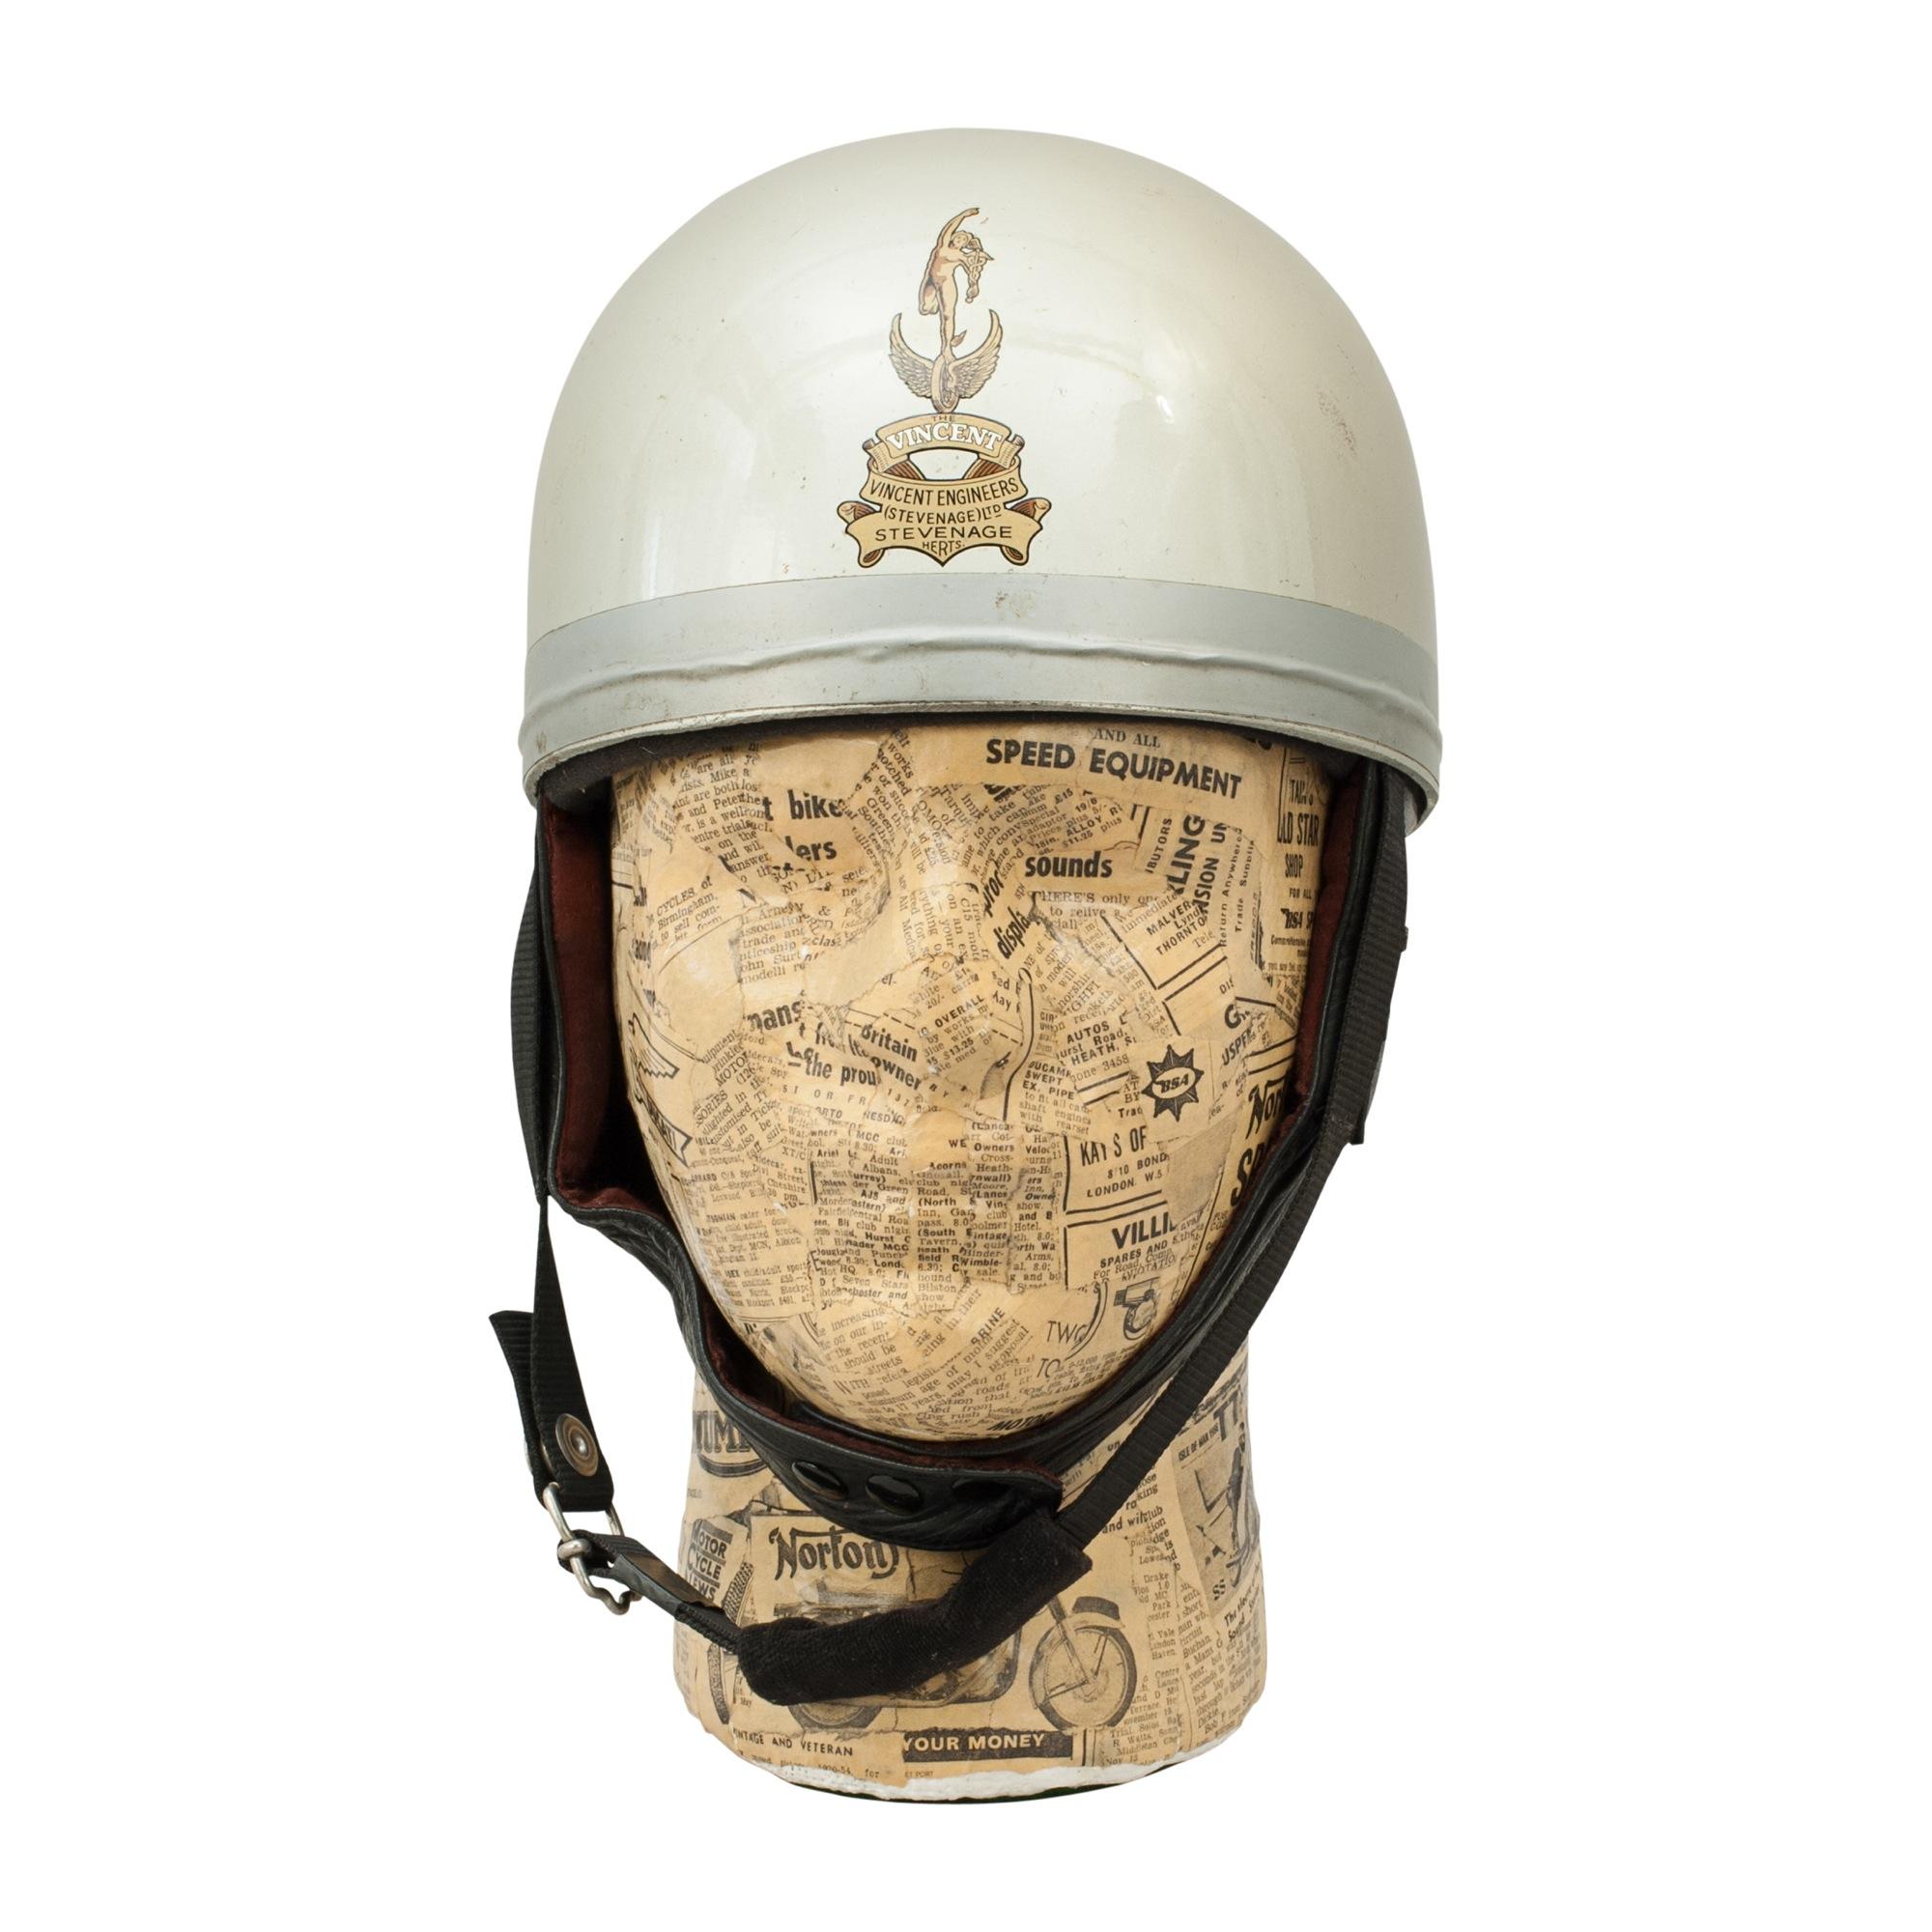 A grey painted motorcycle, Pudding basin shape helmet made in England by Charles Owen. There are decals on the helmet, Vincent of Stevenage on the front and Everoak on the back. This helmet has a cork interior, fitted with a fabric headband and